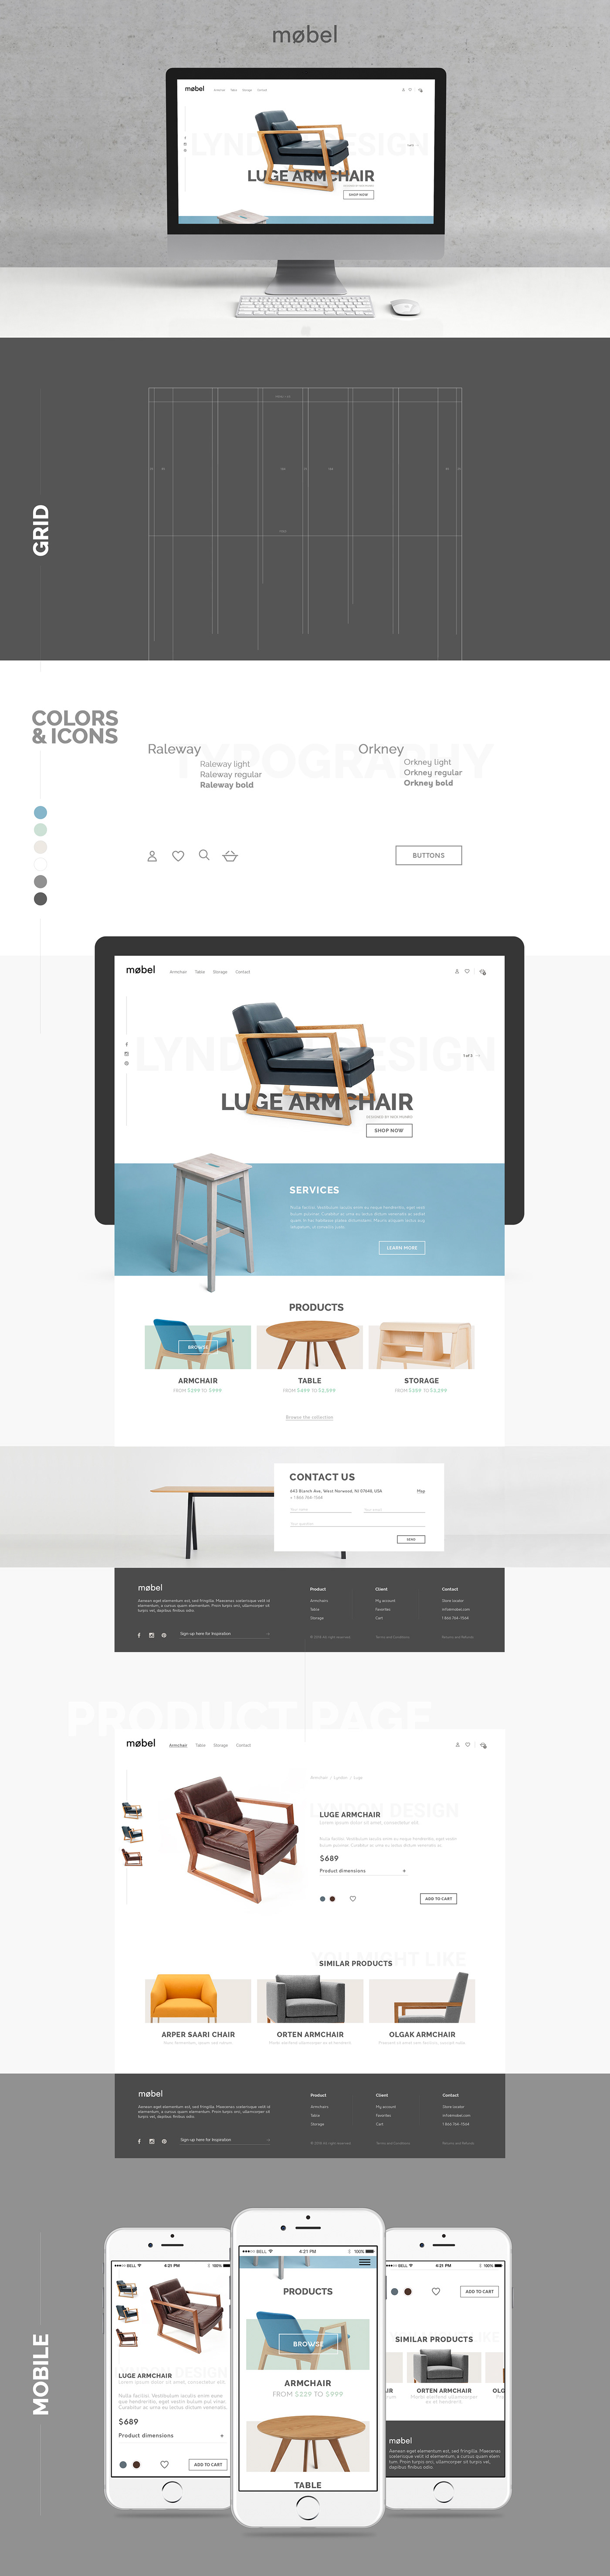 furniture minimalist modern mobile footer grid Ecommerce Product Page UI Web Design 